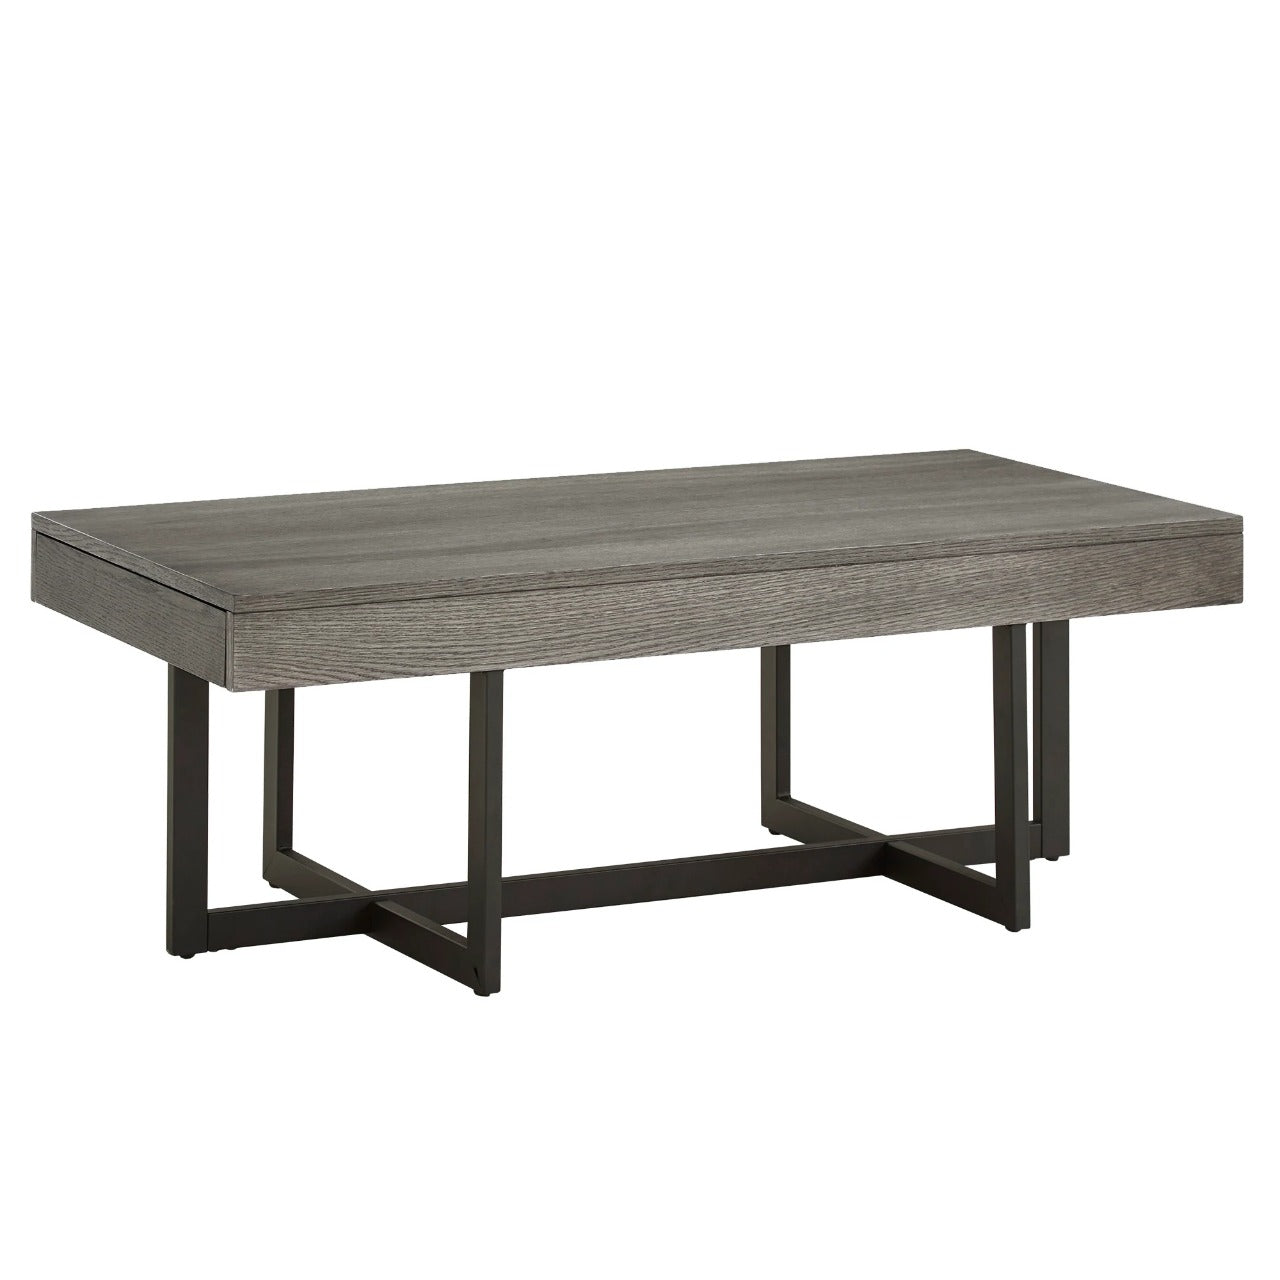 Center Table: Cross Legs Coffee Table with Storage